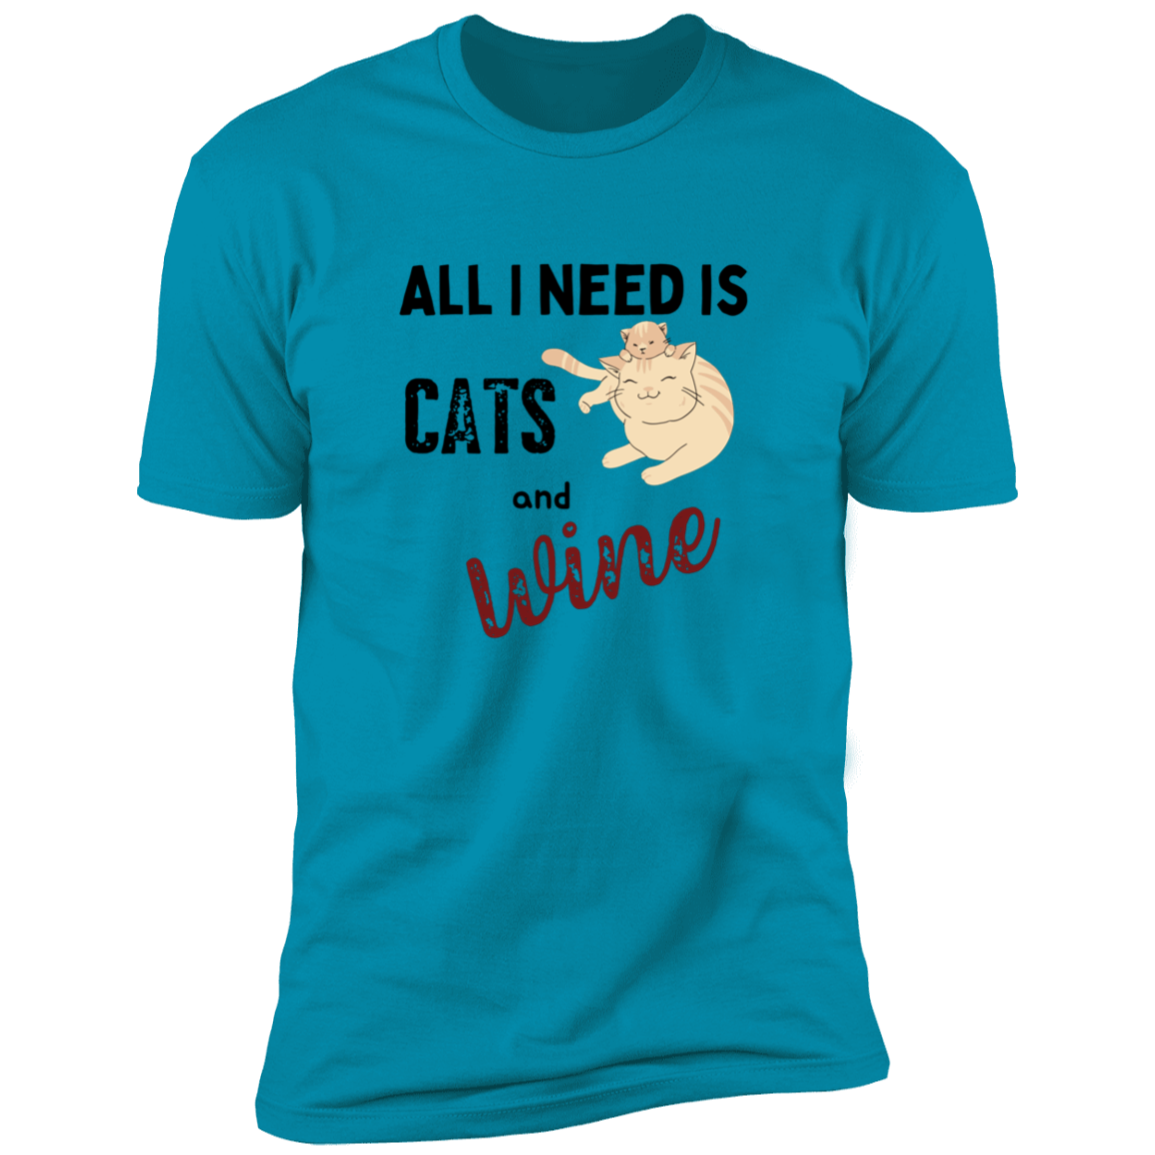 All I Need is Cats and Wine, Cat shirt for humas, in turquoise